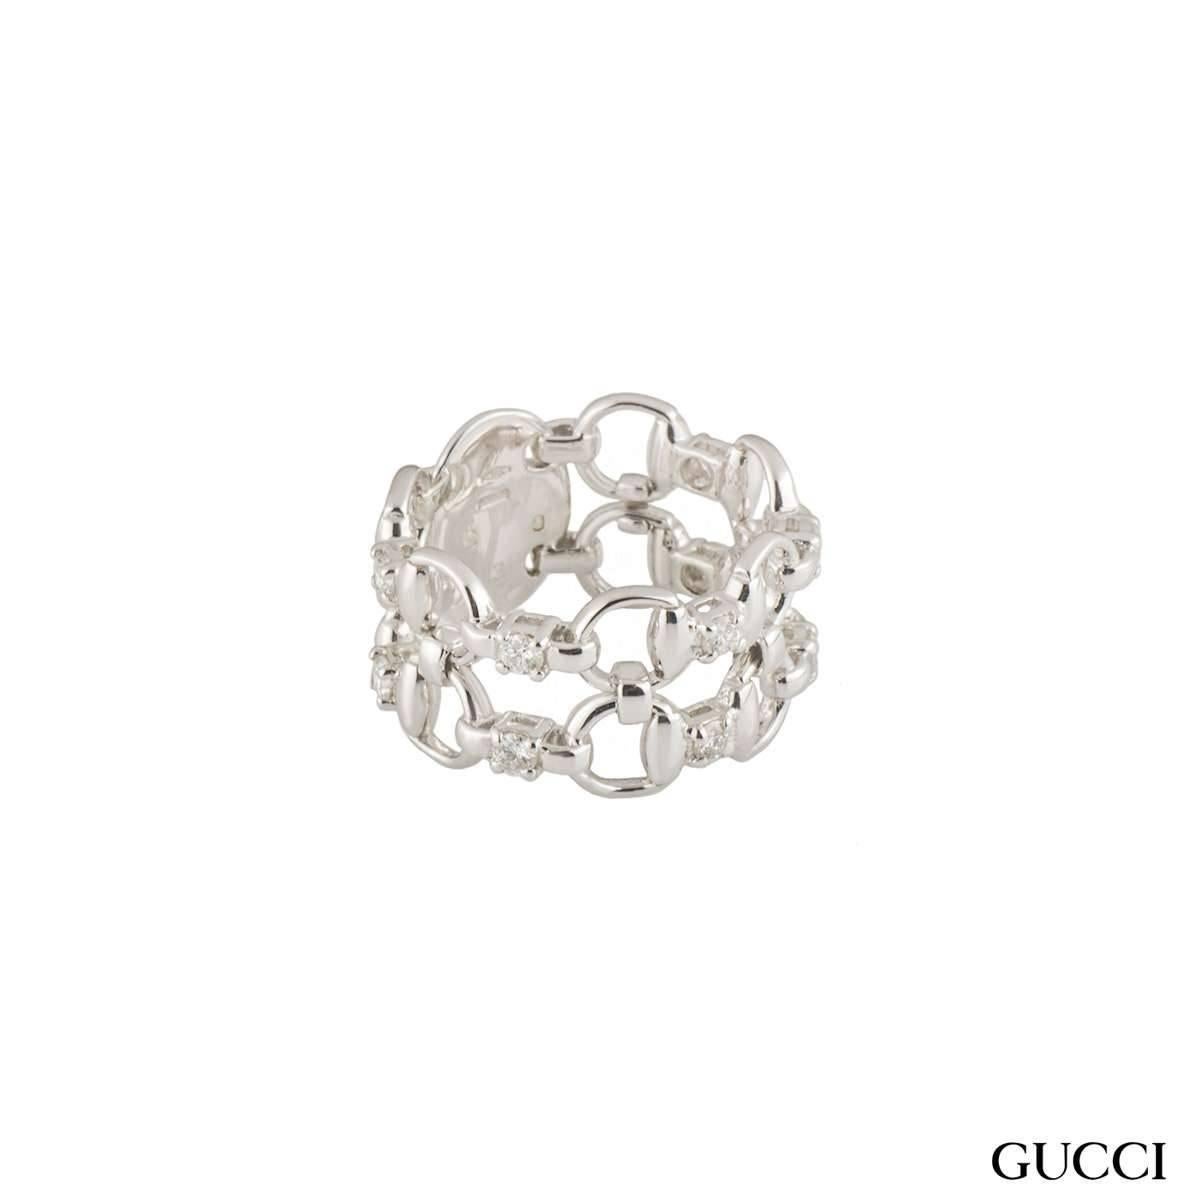 A simple 18k white gold diamond Gucci ring from the Horsebit collection. The ring comprises of the open work iconic horseshoe design all the way around. The ring measures 11m in width and is a size 13. The ring has a gross weight of 7.90 grams.

The